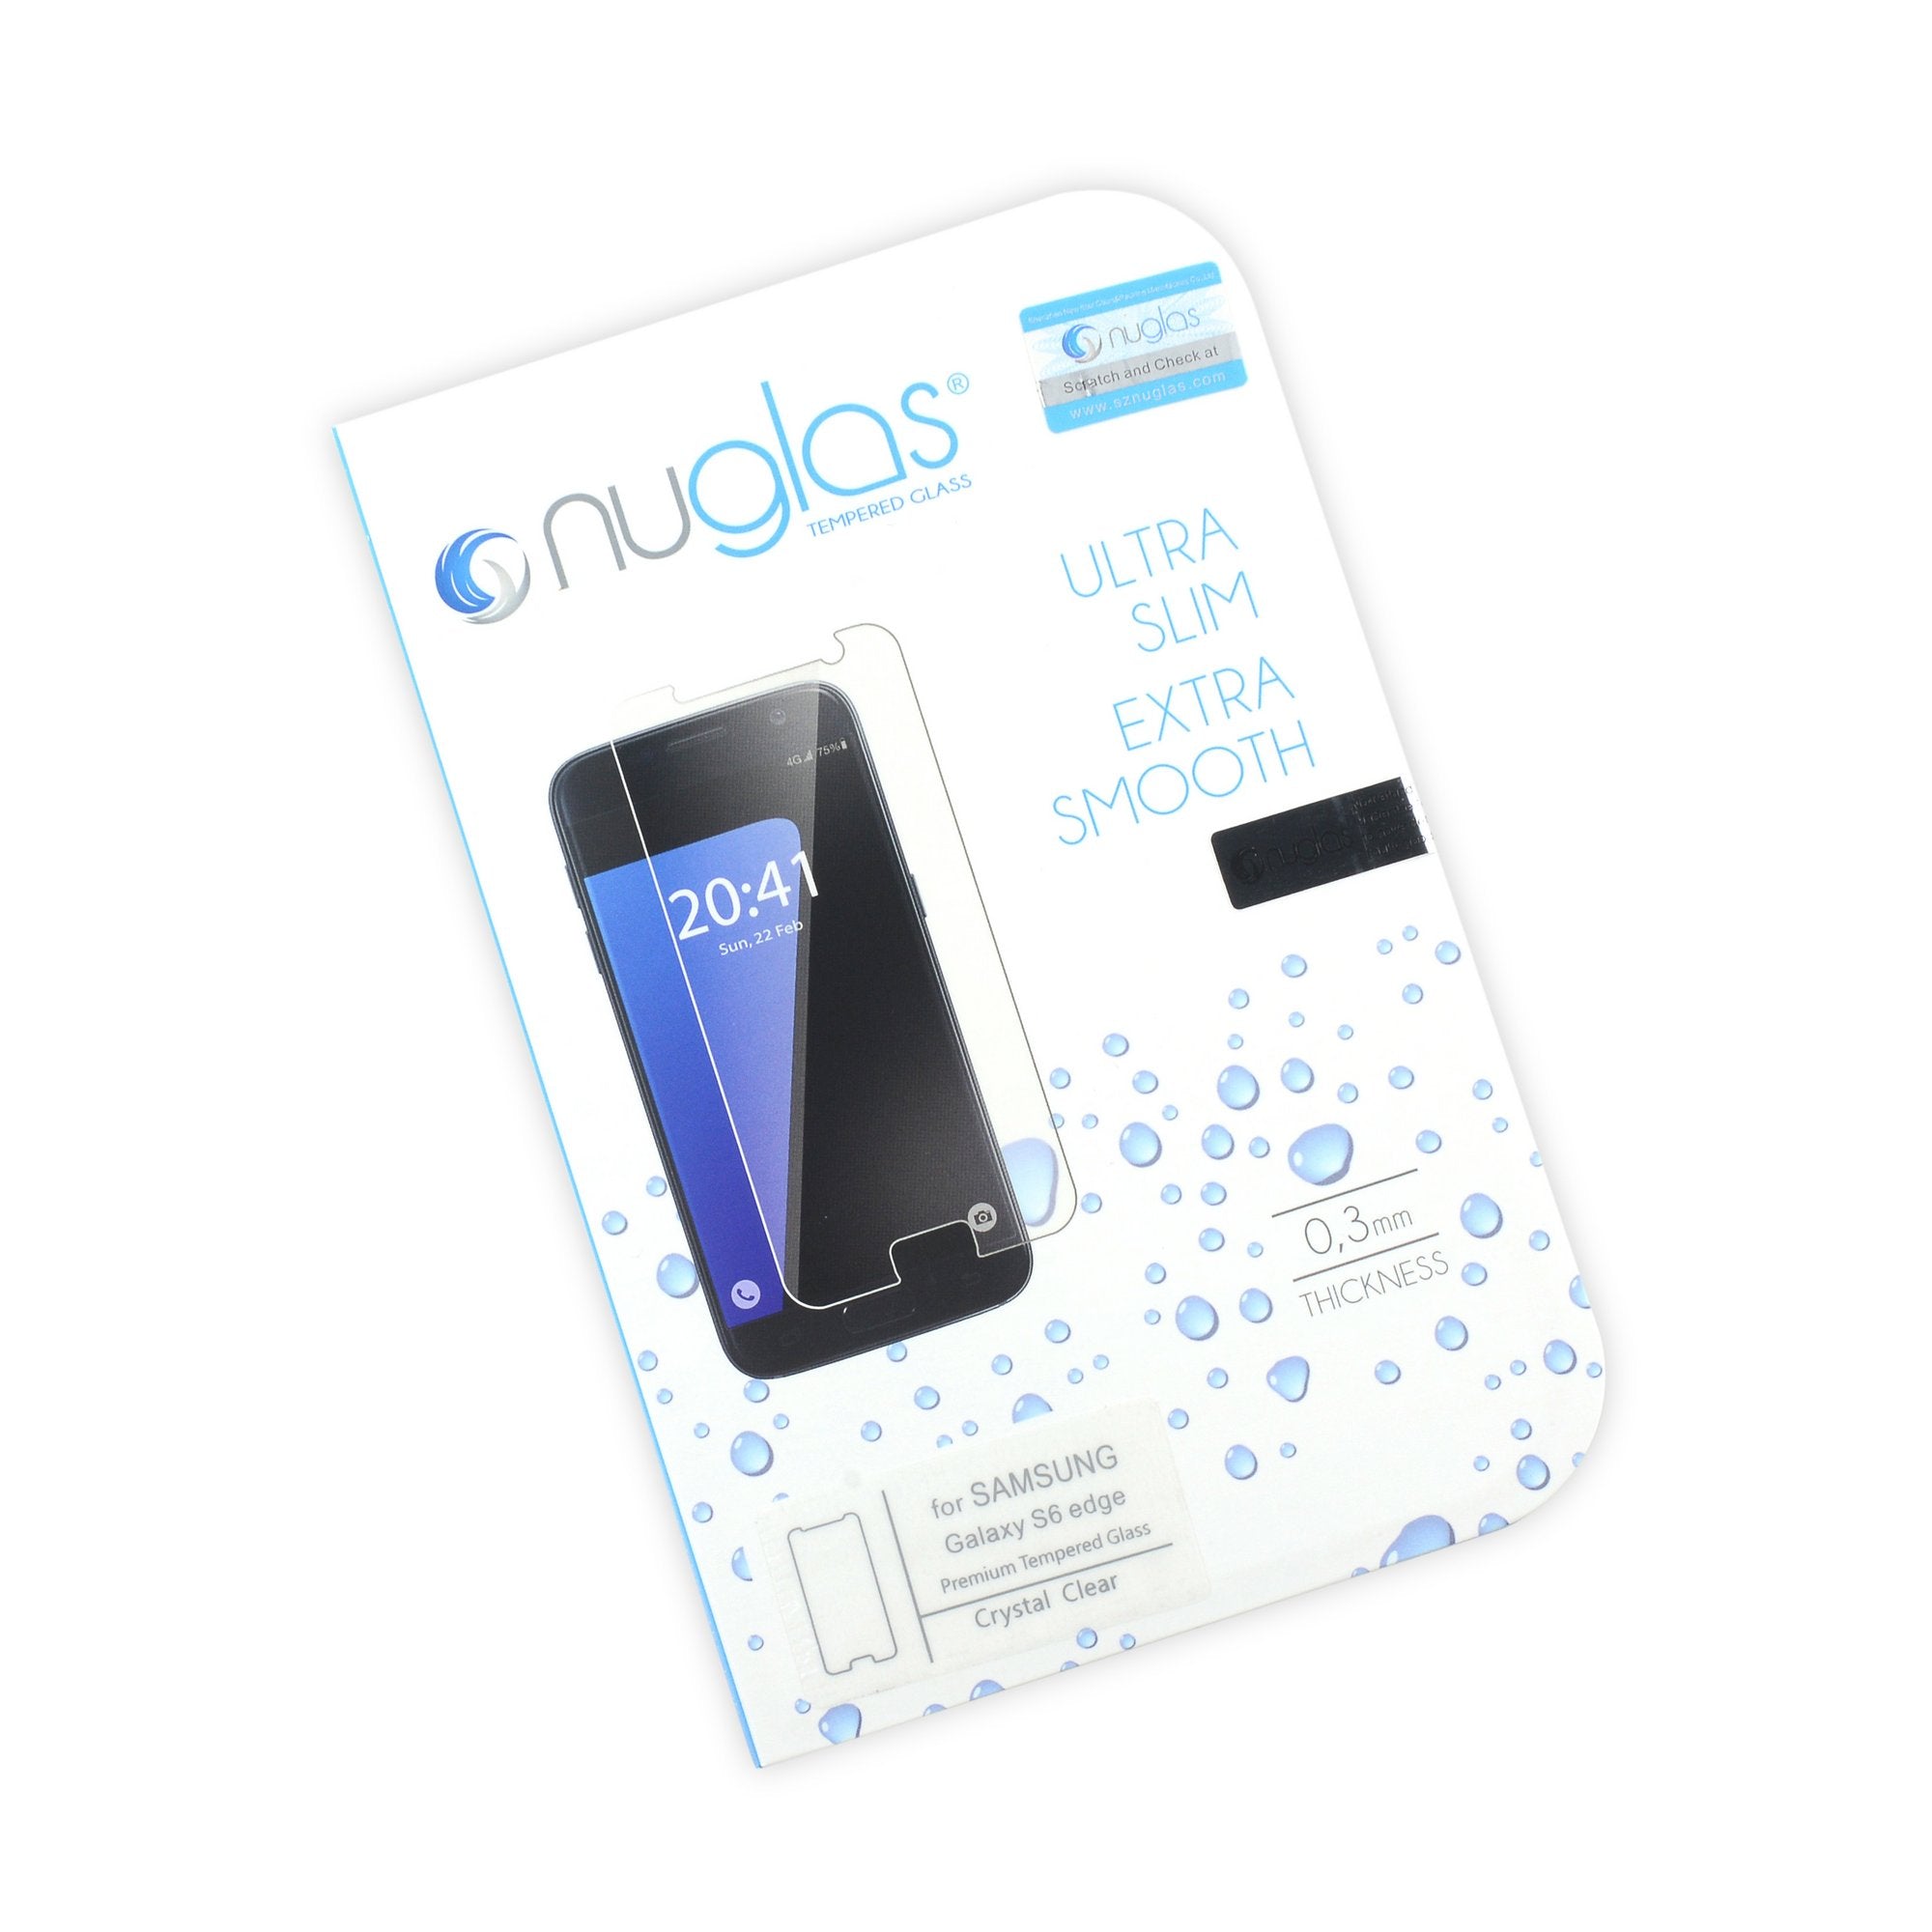 NuGlas Tempered Glass Screen Protector for Galaxy S6 Edge